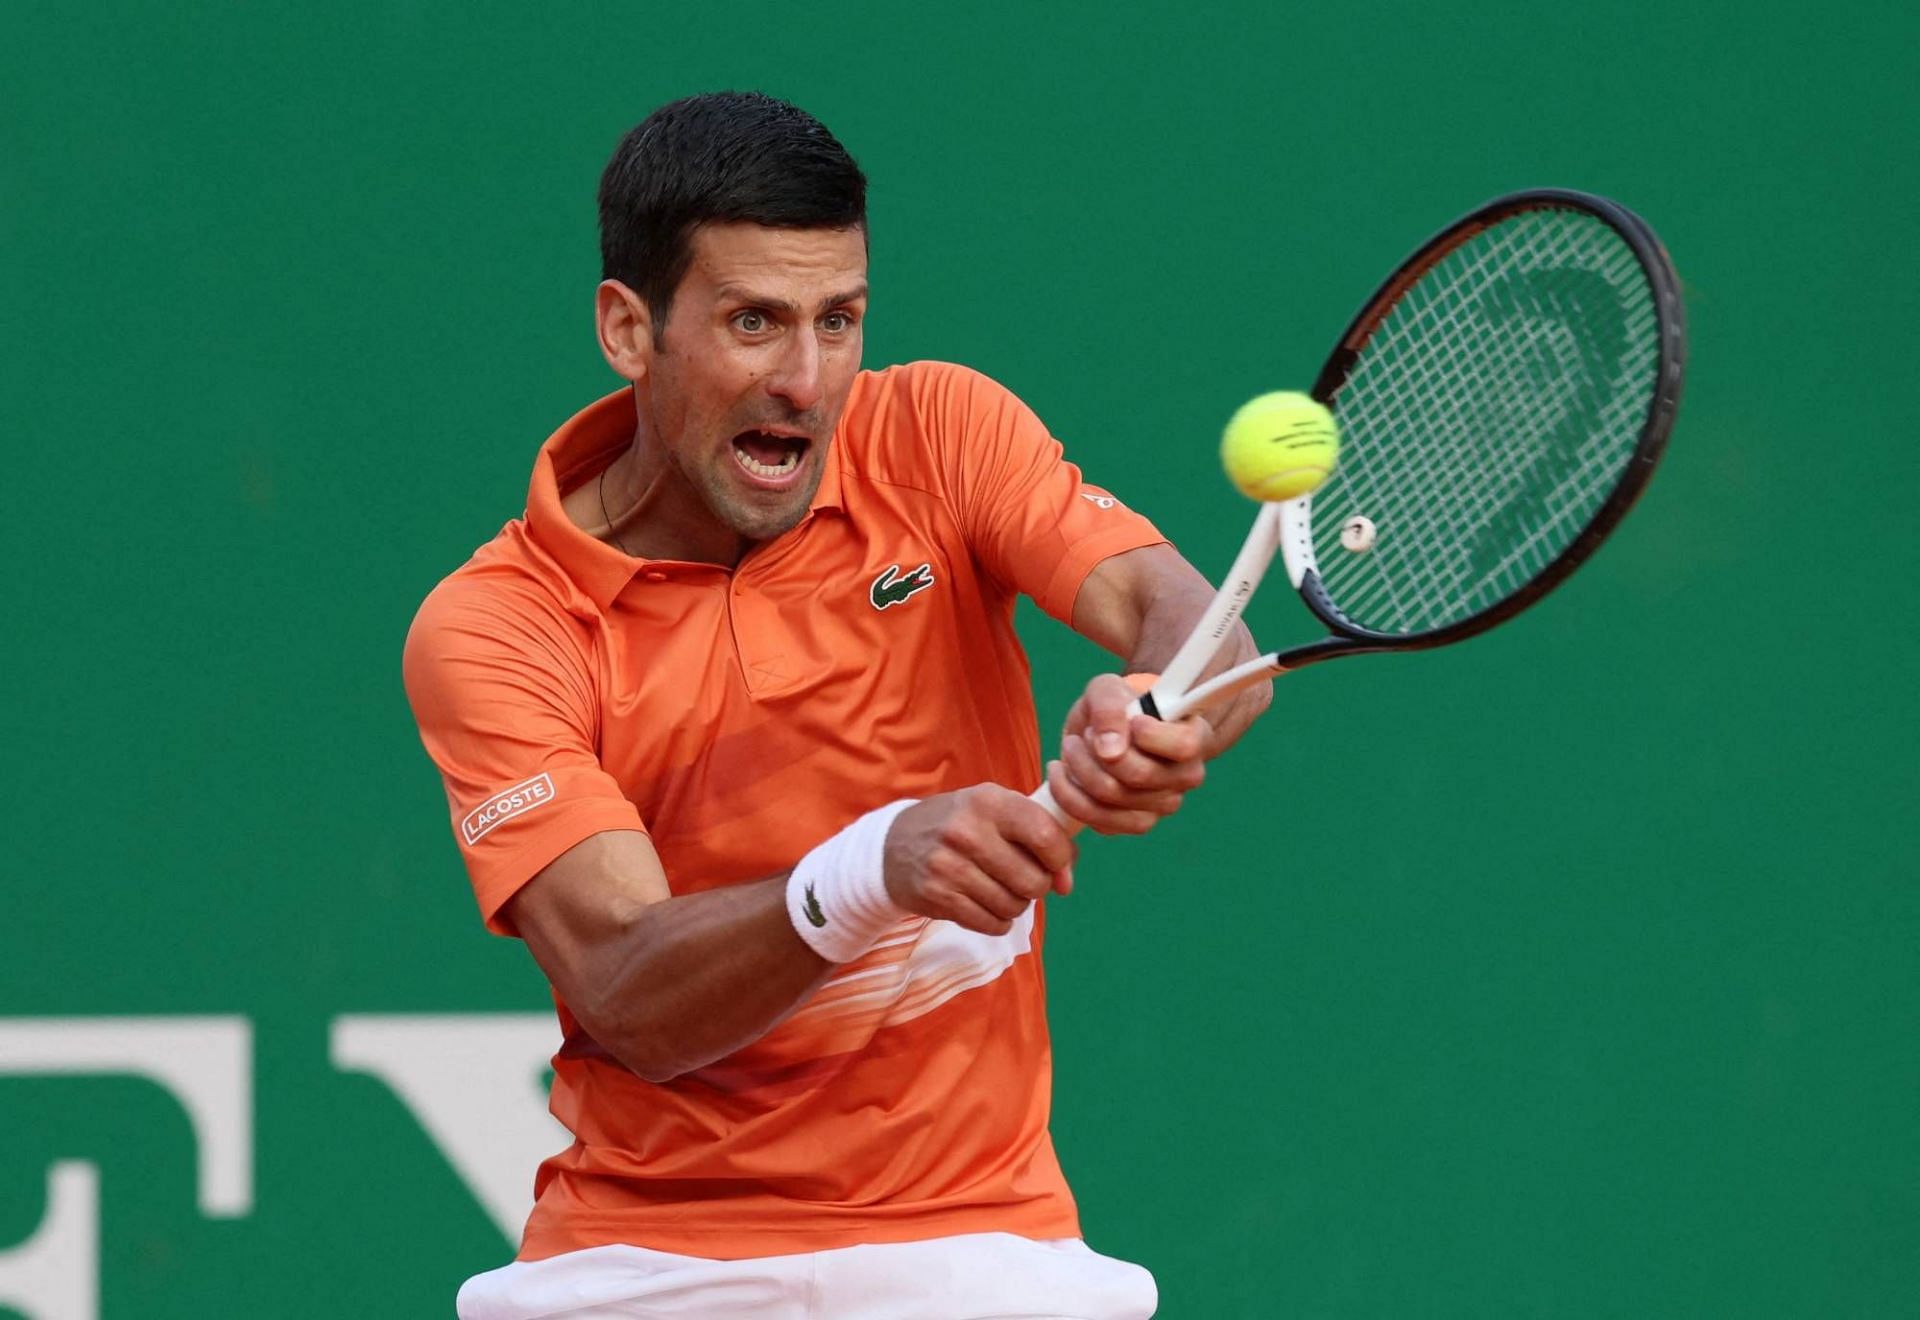 Djokovic&#039;s backhand is an excellent defensive stroke